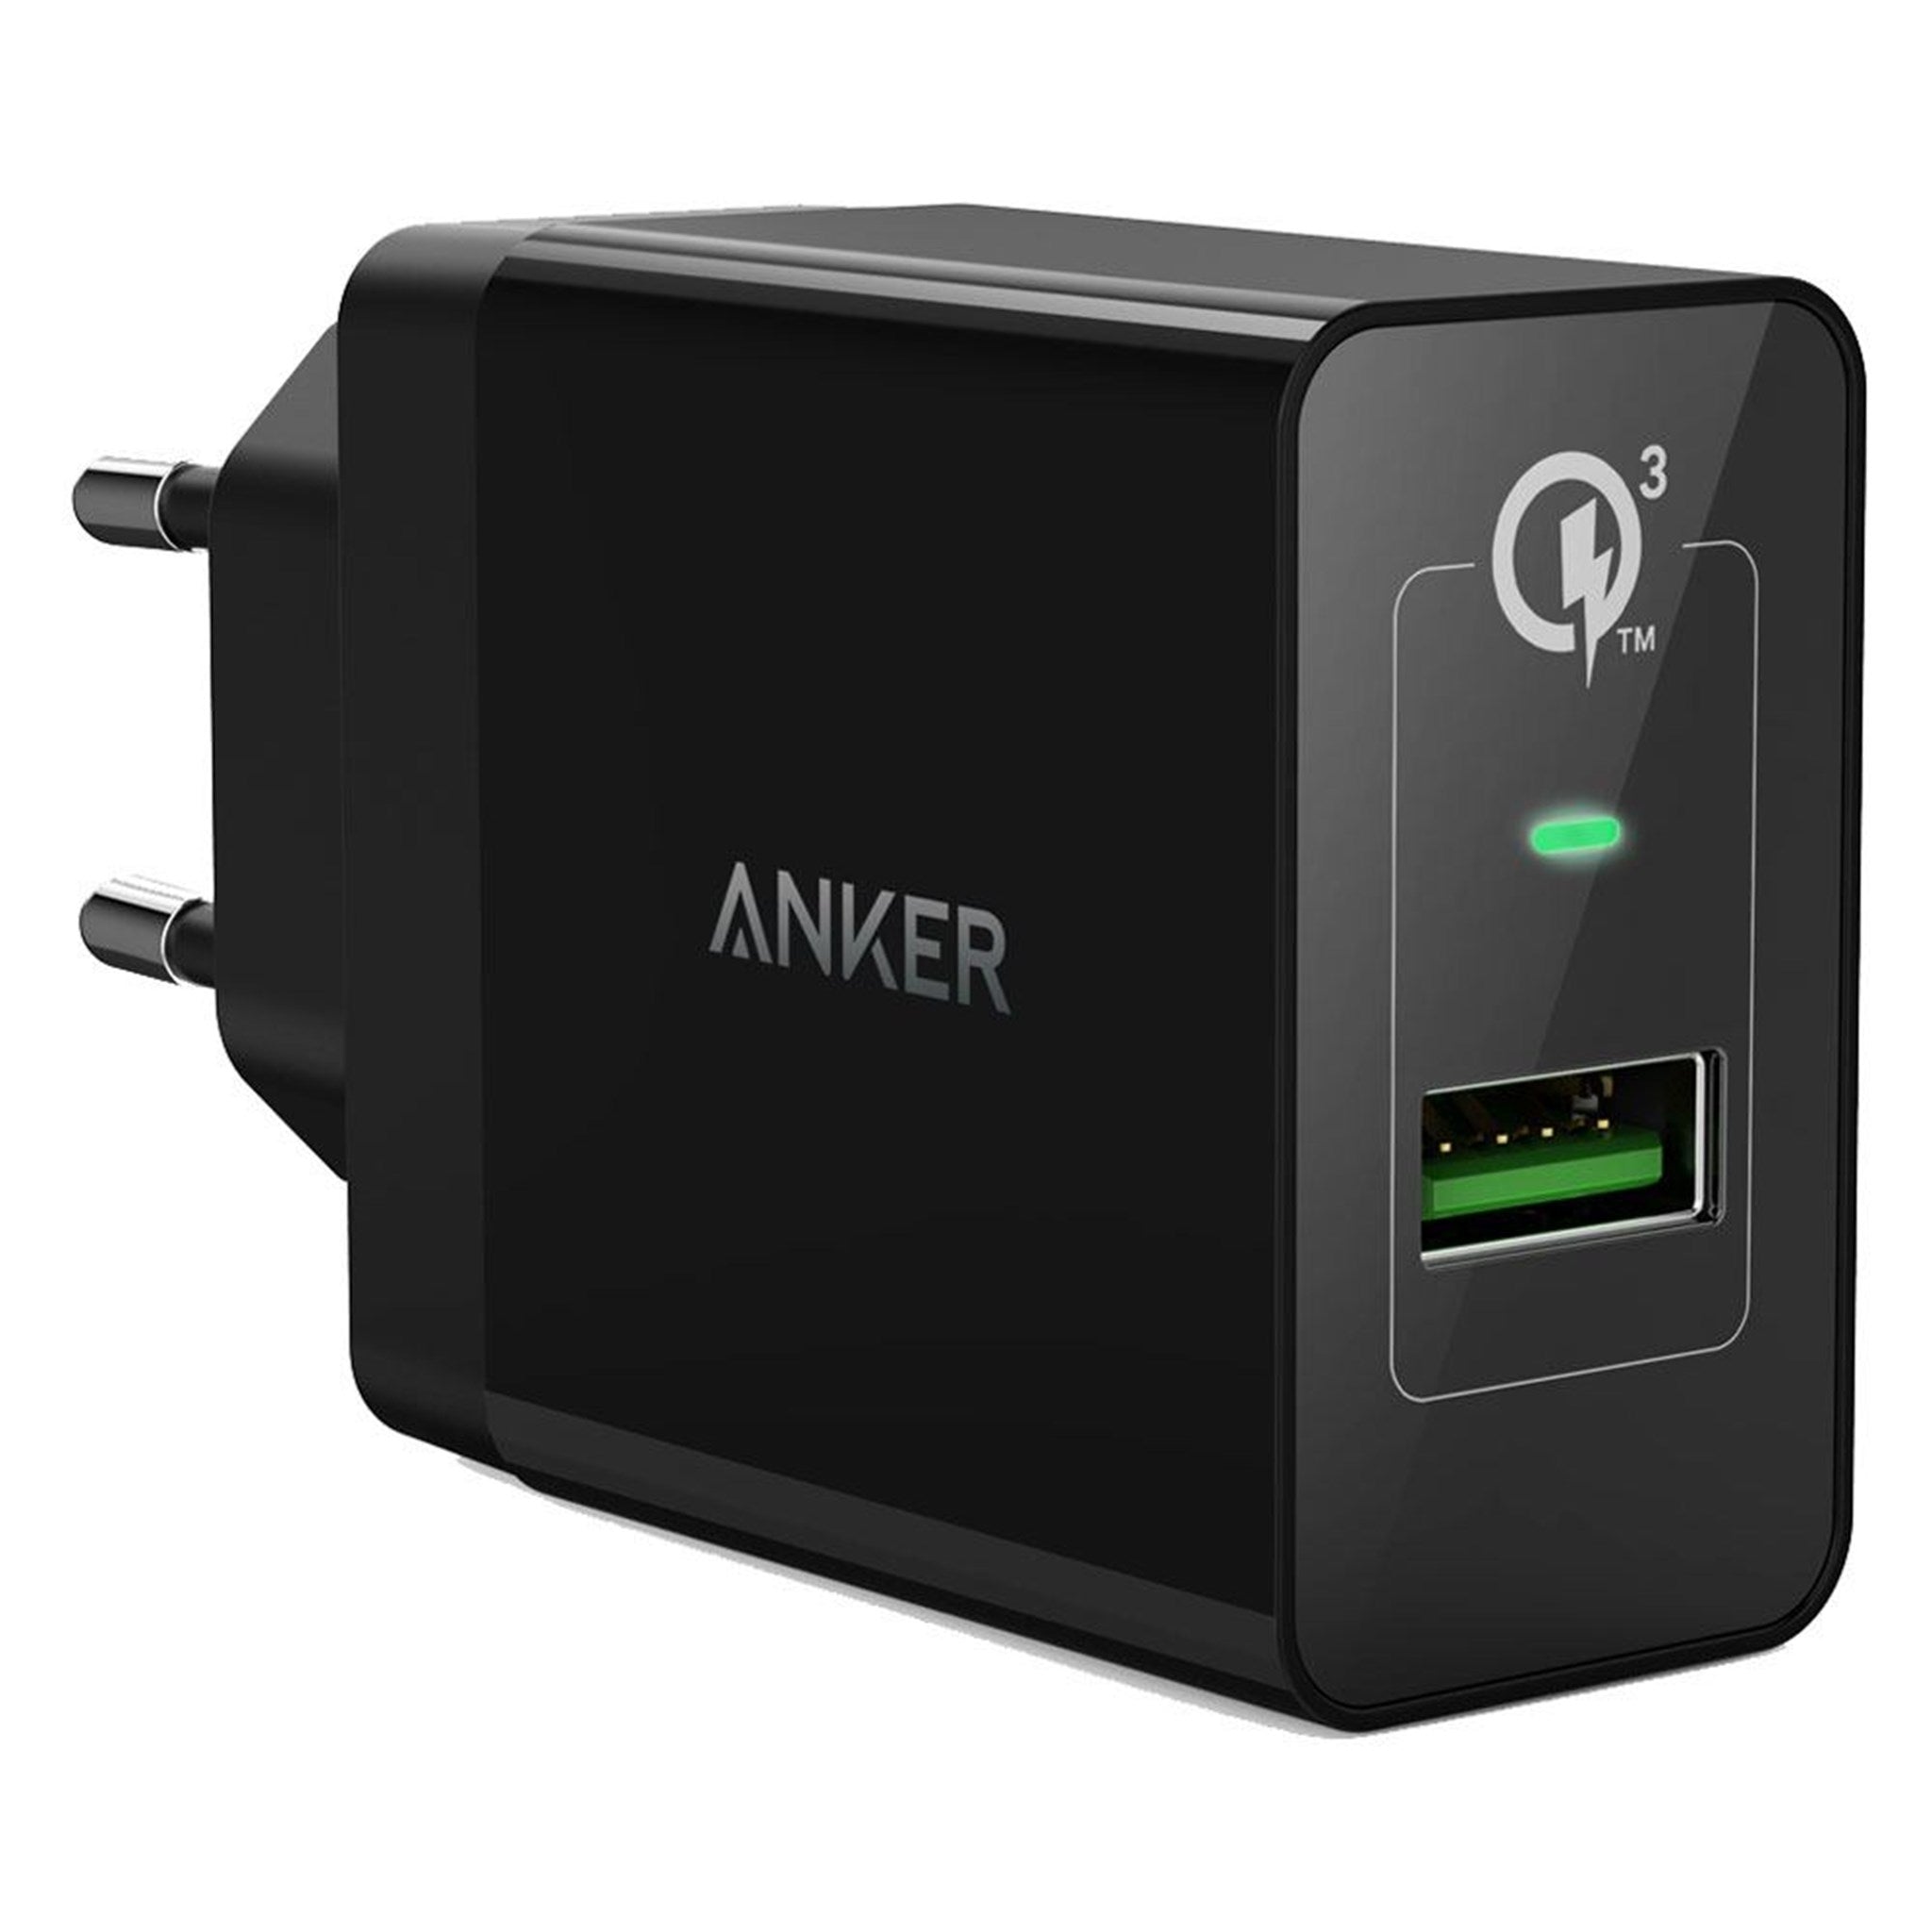 Anker-PowerPort-1-Quick-Charge-Micro-USB-kabel-B2013L12.jpg